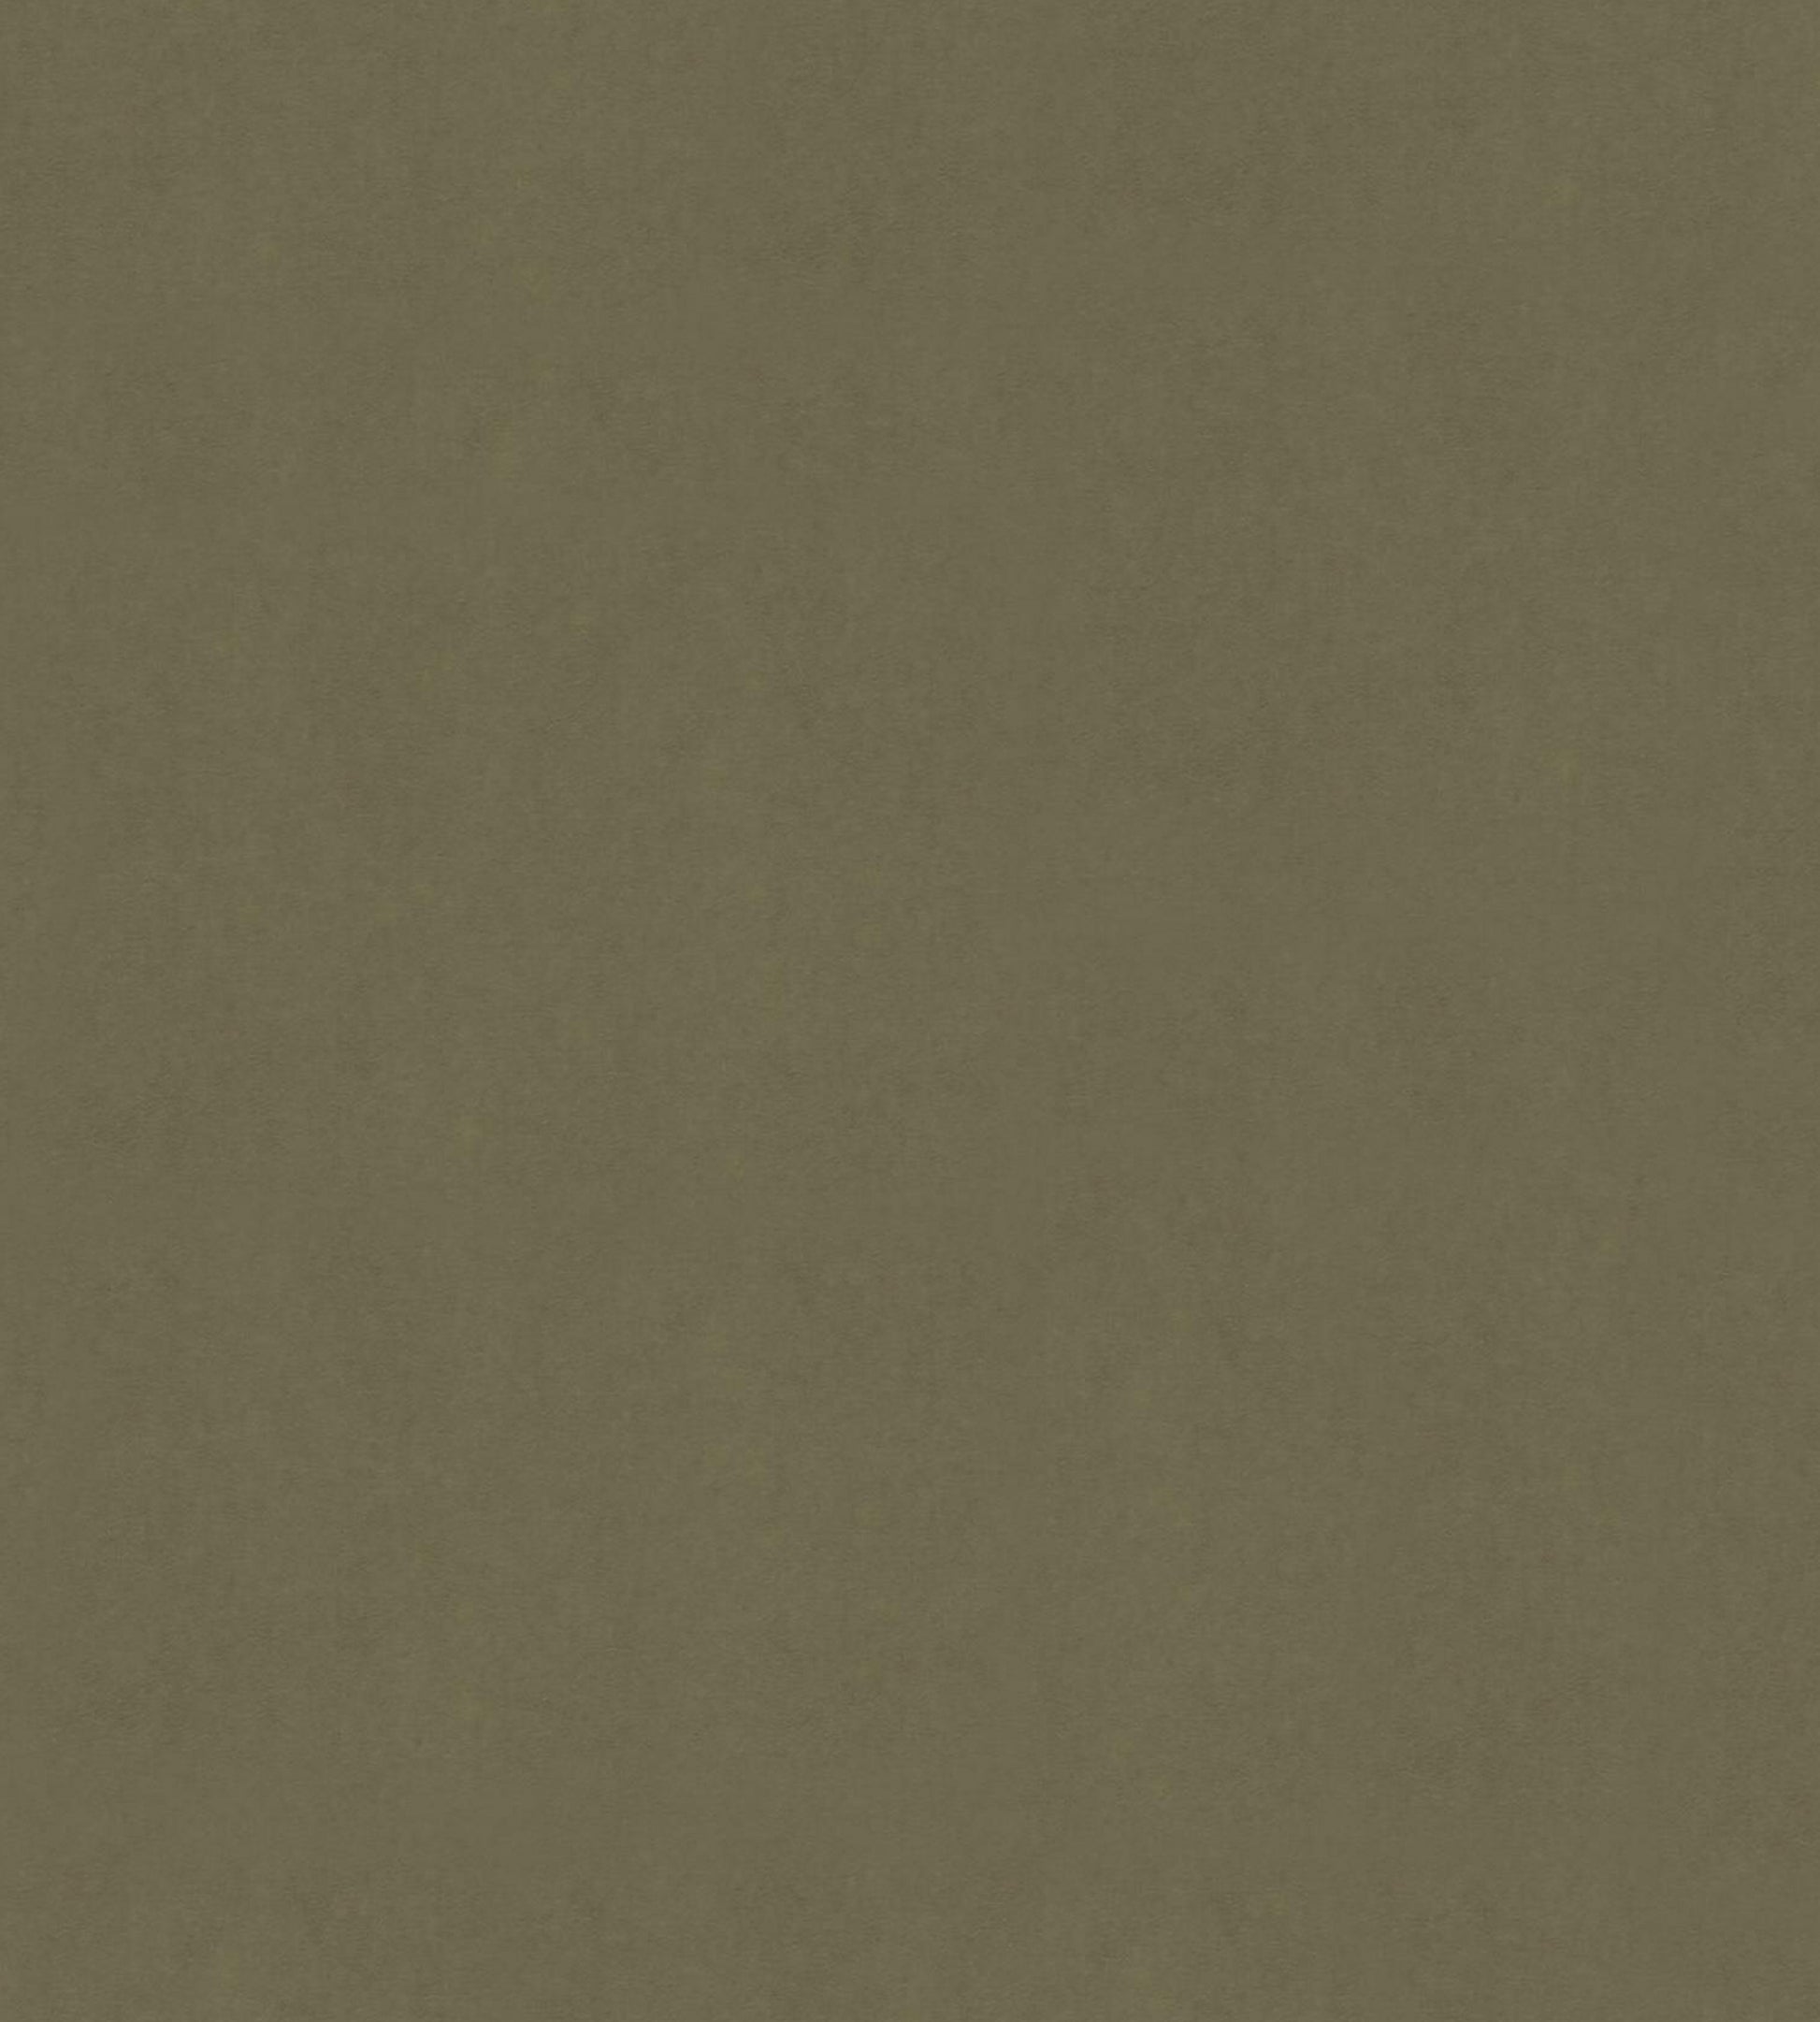 Purchase Old World Weavers Fabric Pattern AB 10461000, Sensuede Verde 1